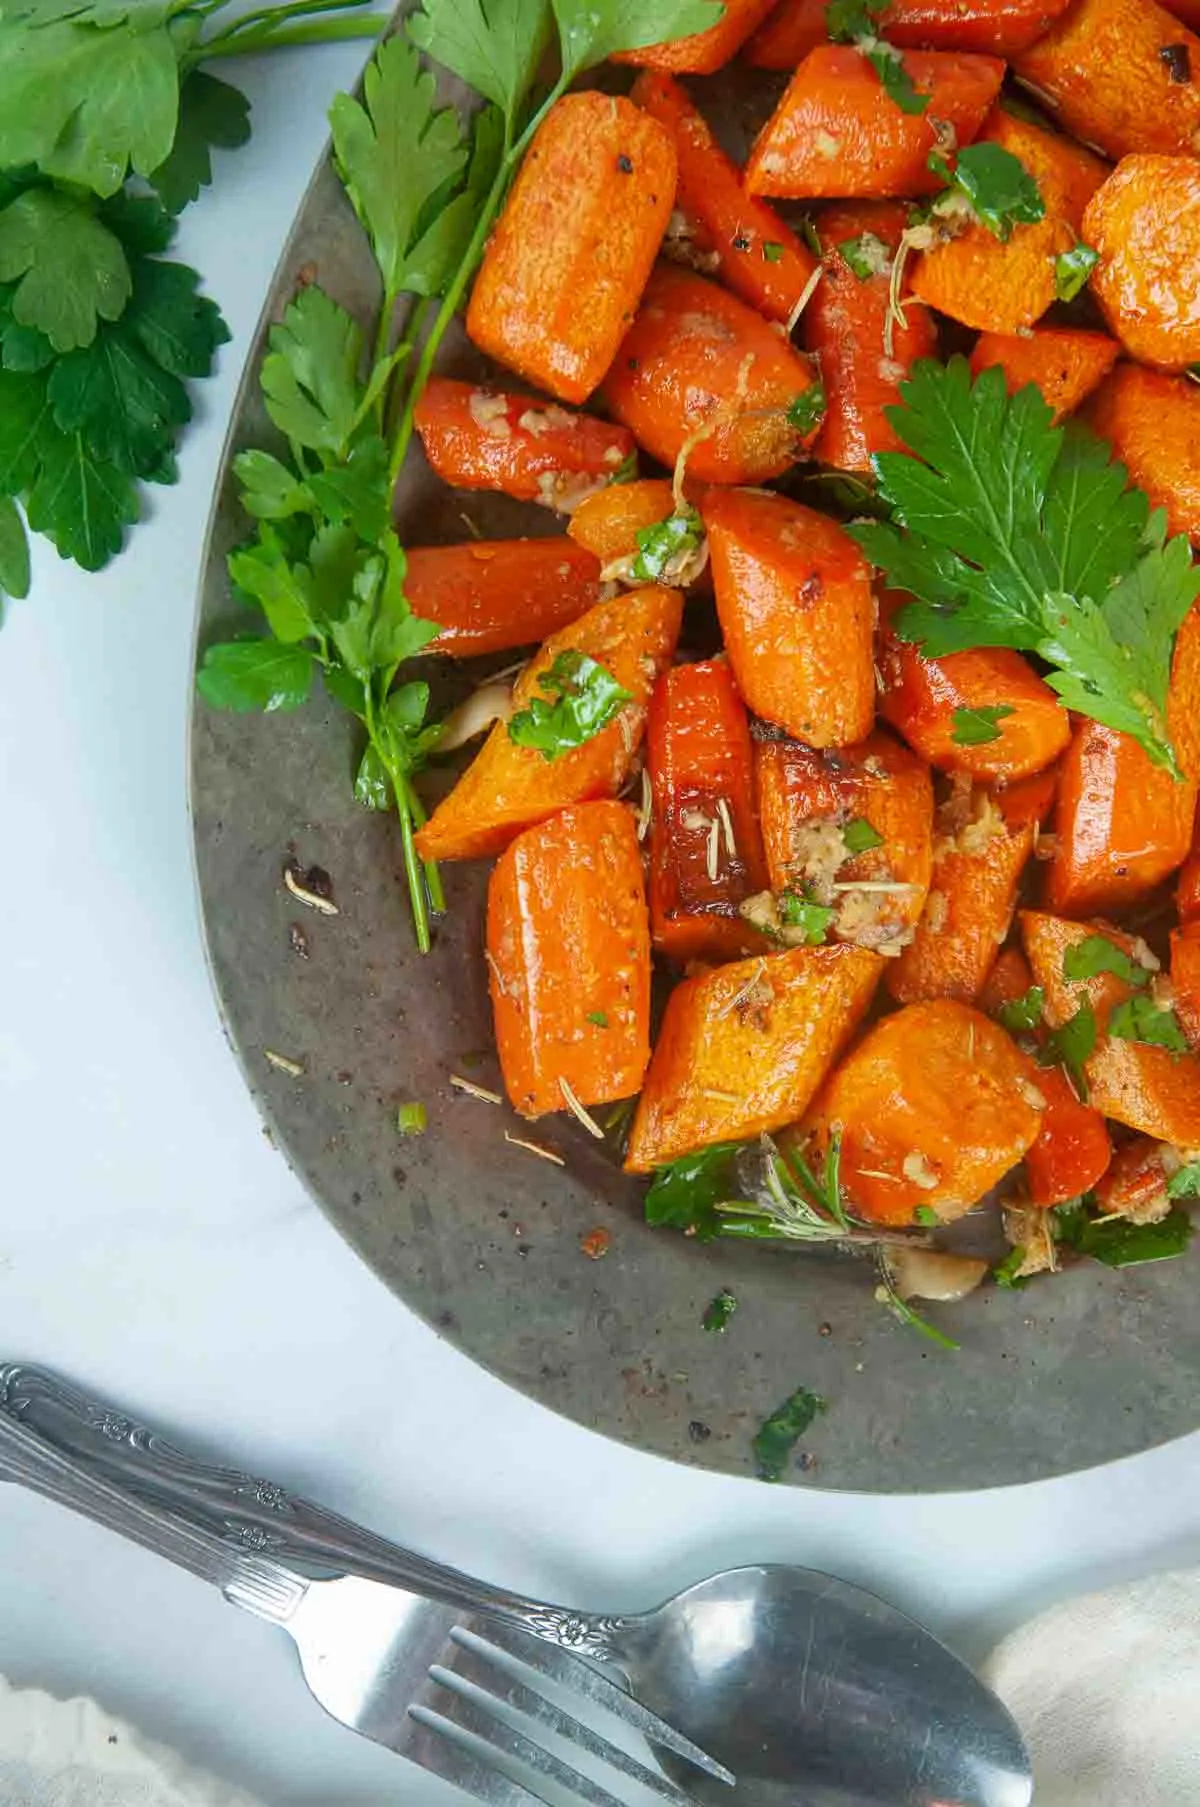 Garlic and Herb Roasted Carrots are an easy side dish.